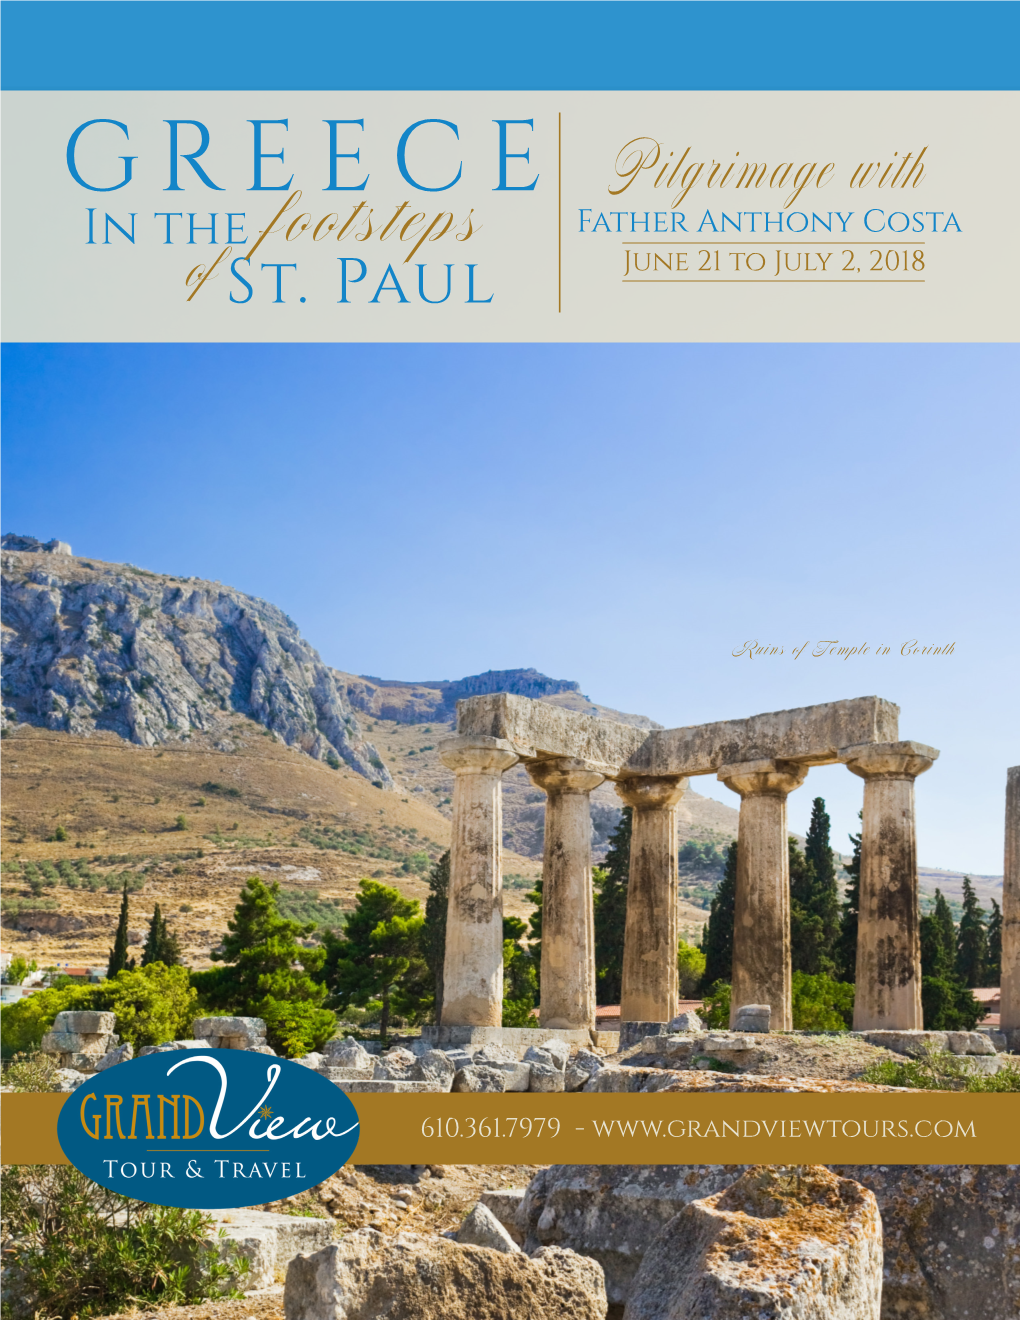 GREECE Pilgrimage with in the Father Anthony Costa Footsteps June 21 to July 2, 2018 Ofst